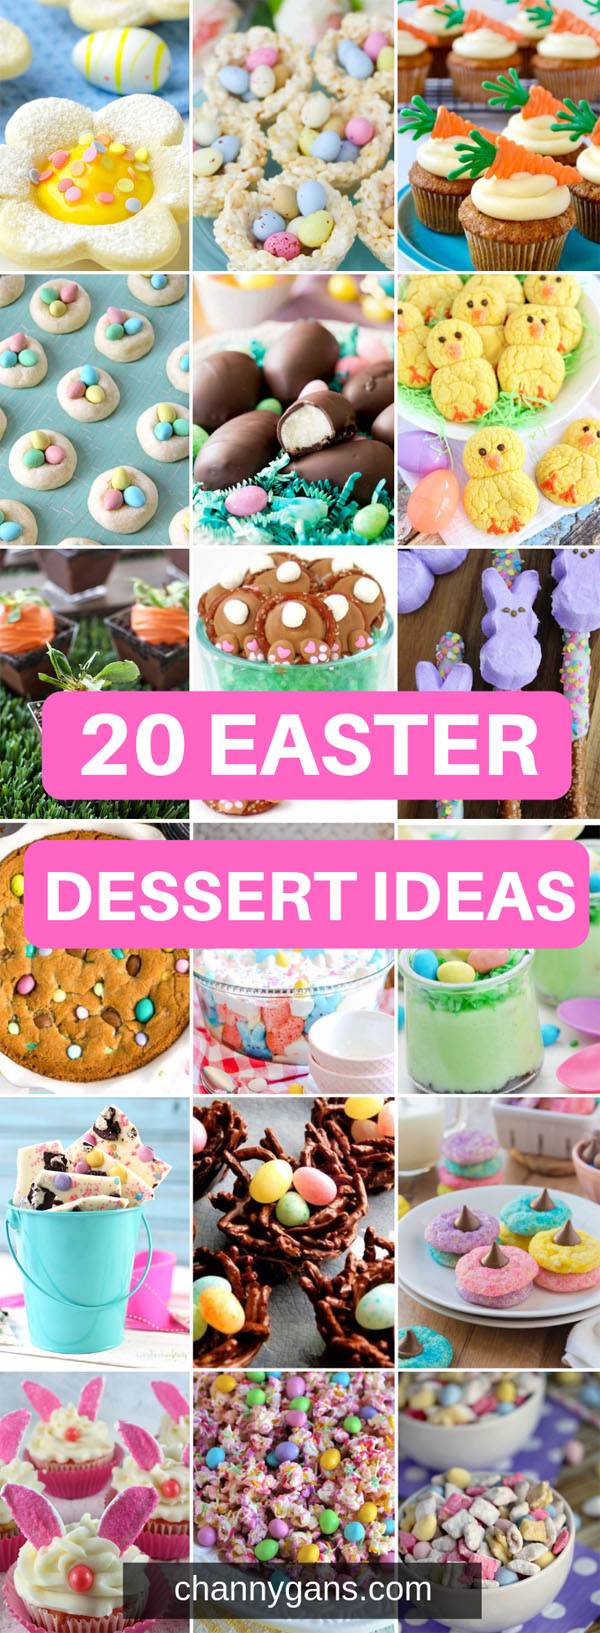 Easter desserts are always fun to make - and eat of course! These fun and festive Easter dessert ideas will make a great addition to your table this year.